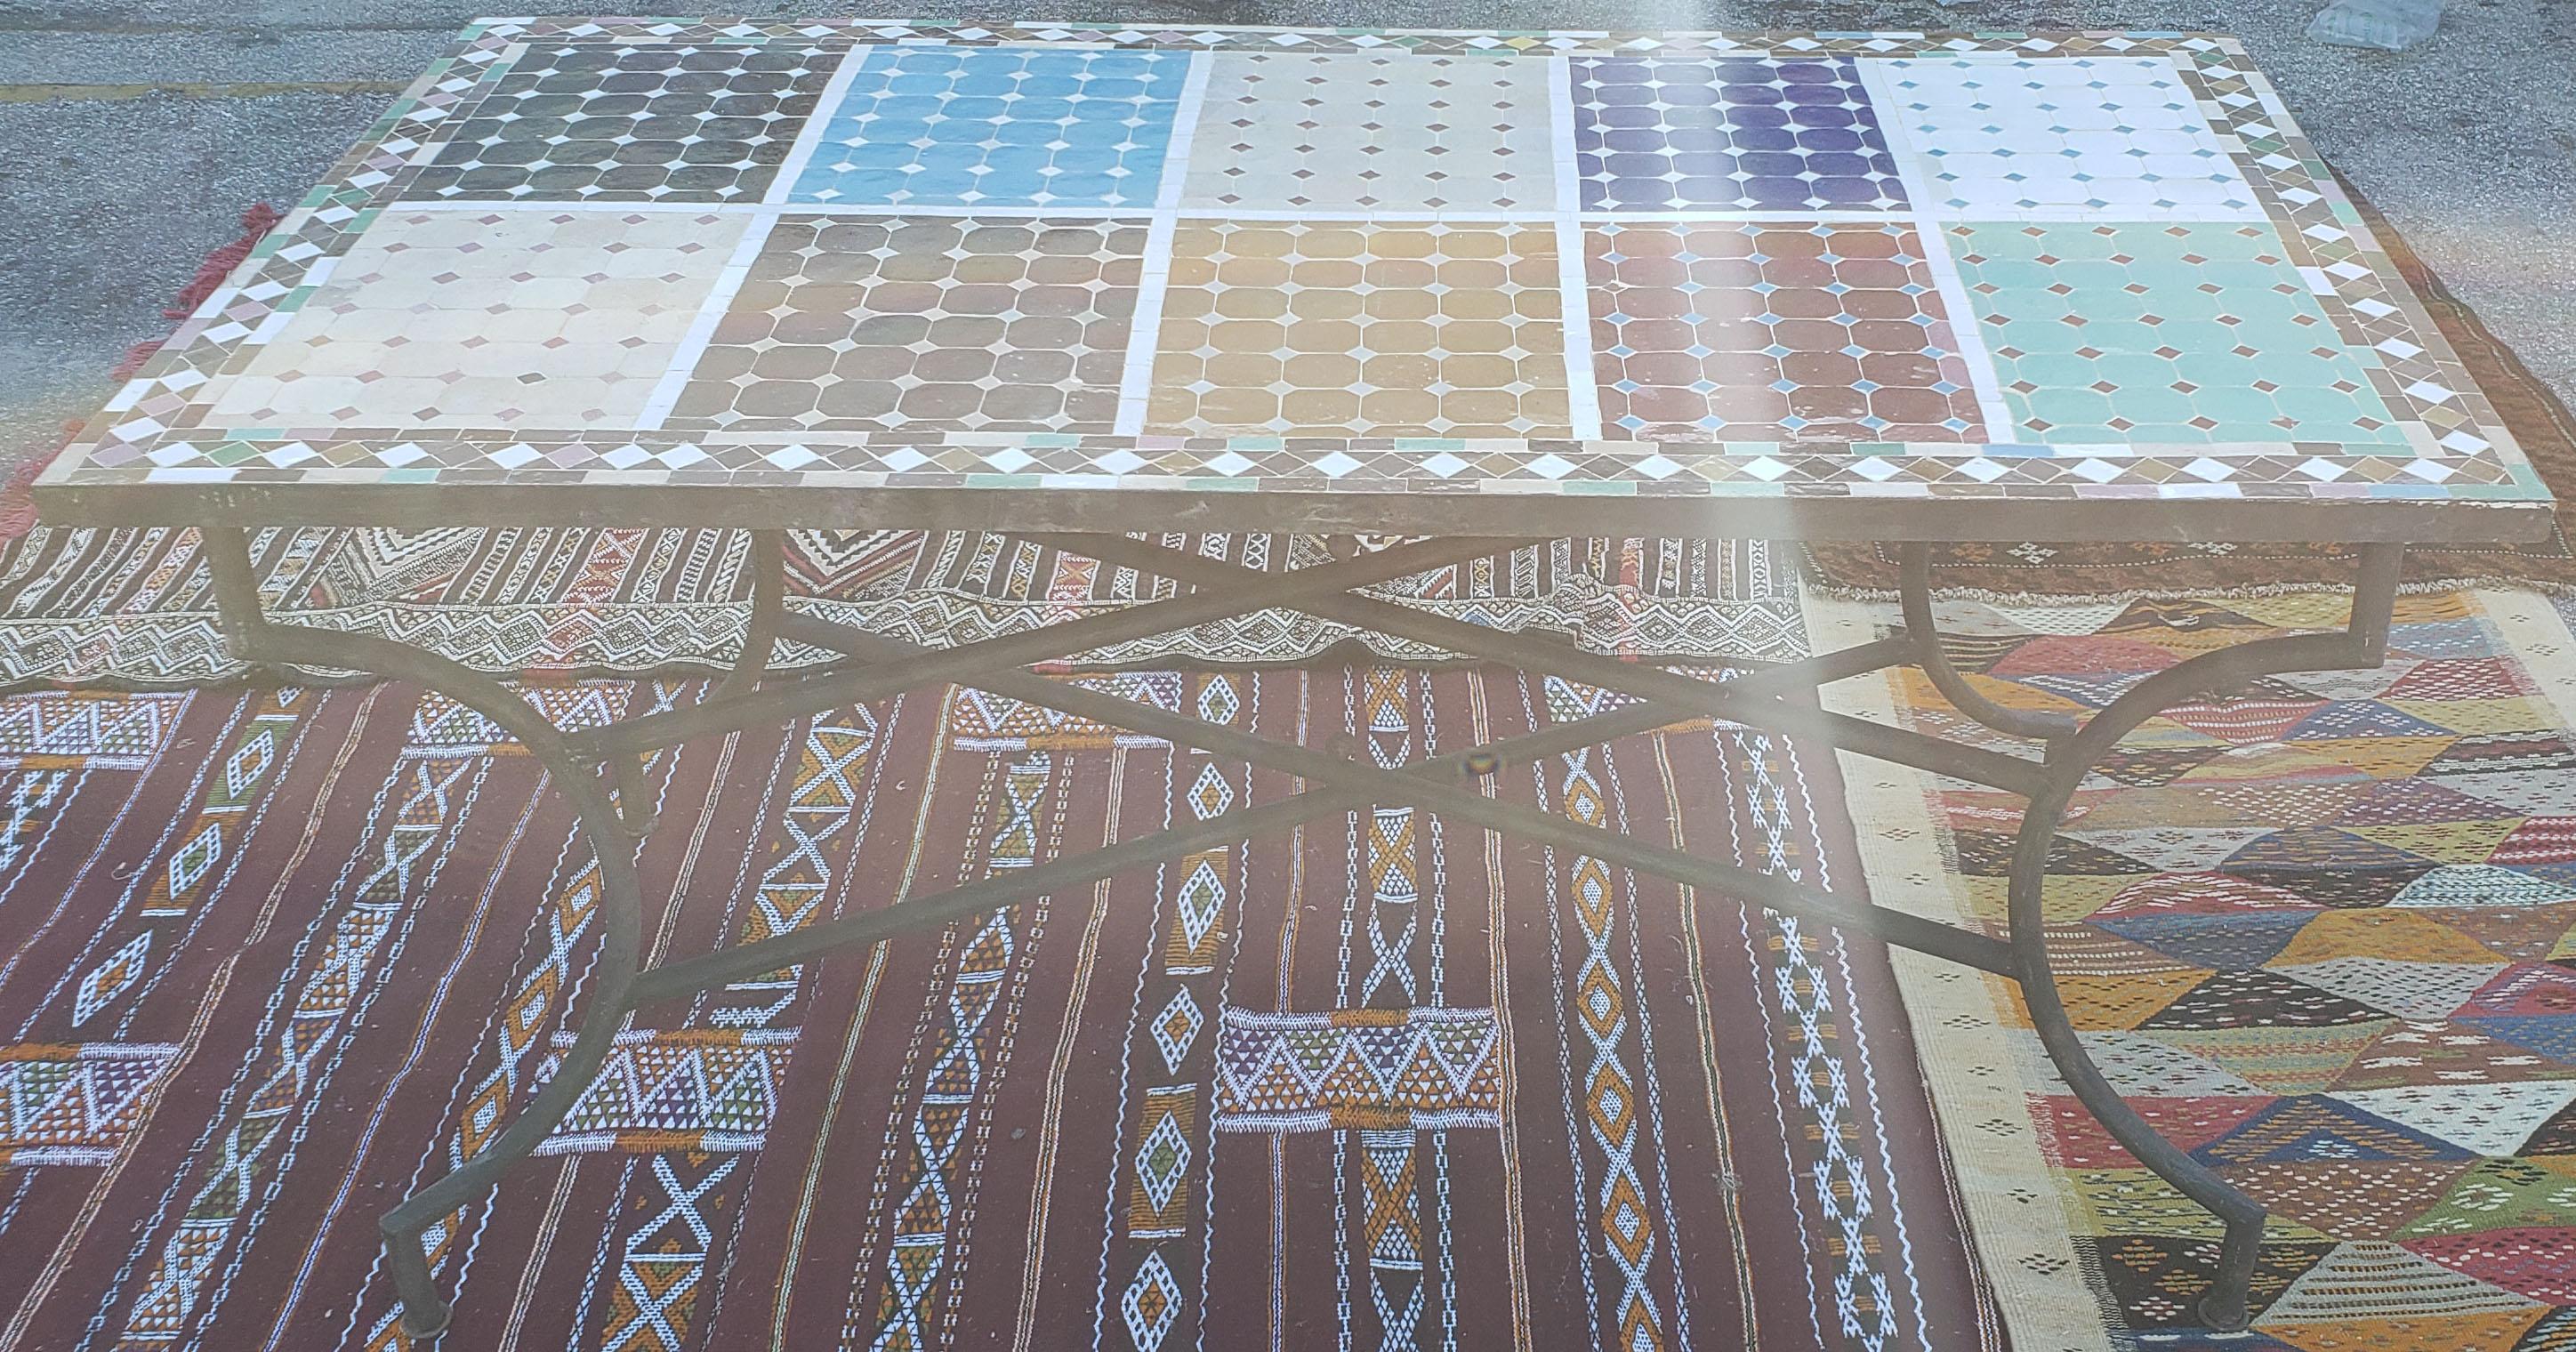 A new arrival. 100 % glazed square. Sampler pattern.
Multi-color Sampler Moroccan mosaic dining room table (for up to 6 people) measuring approximately 32